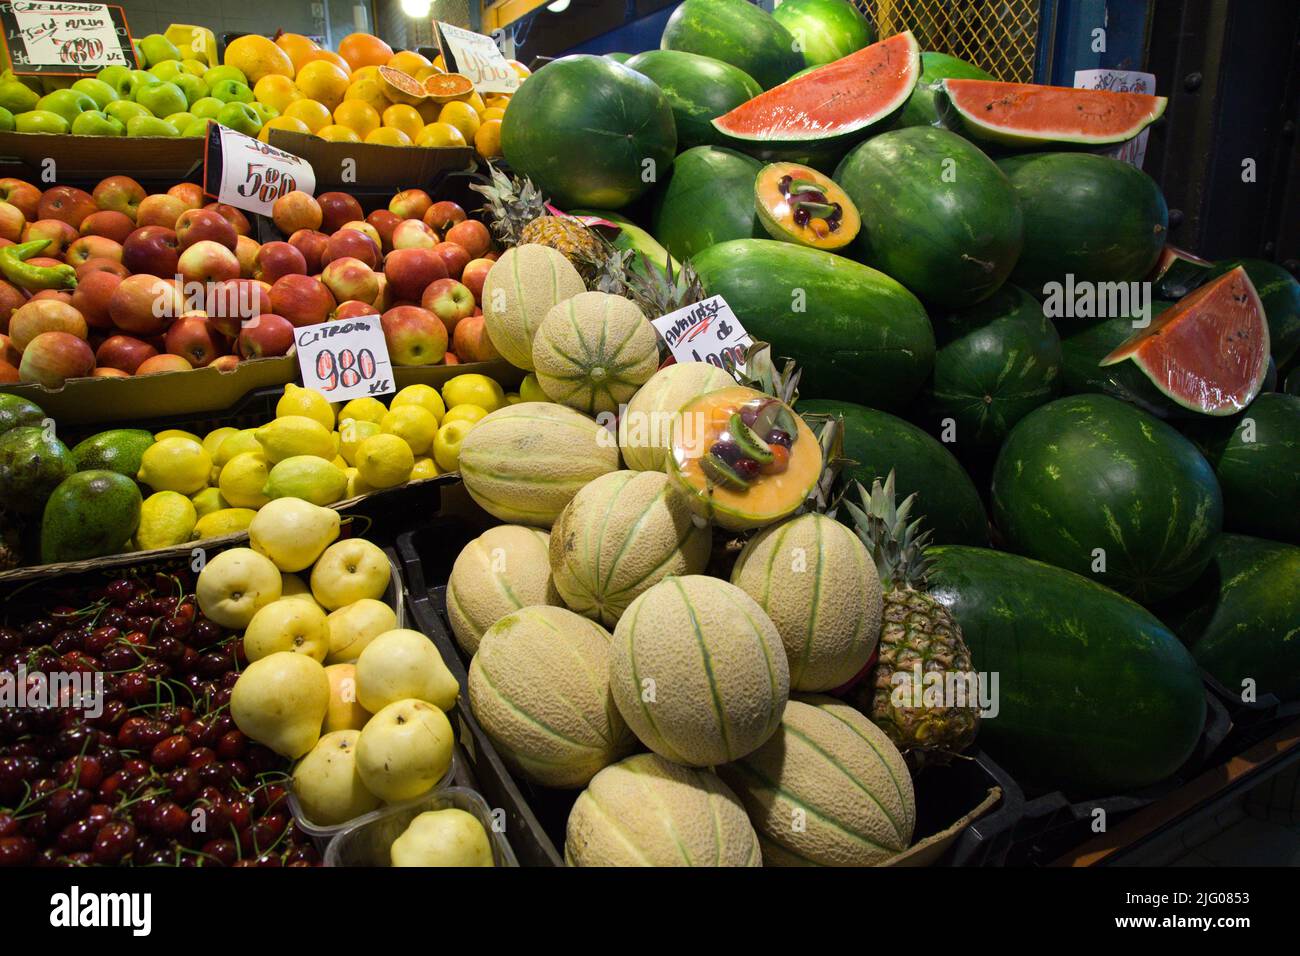 Hungary, Budapest, Central Market Hall, food, commerce, Stock Photo